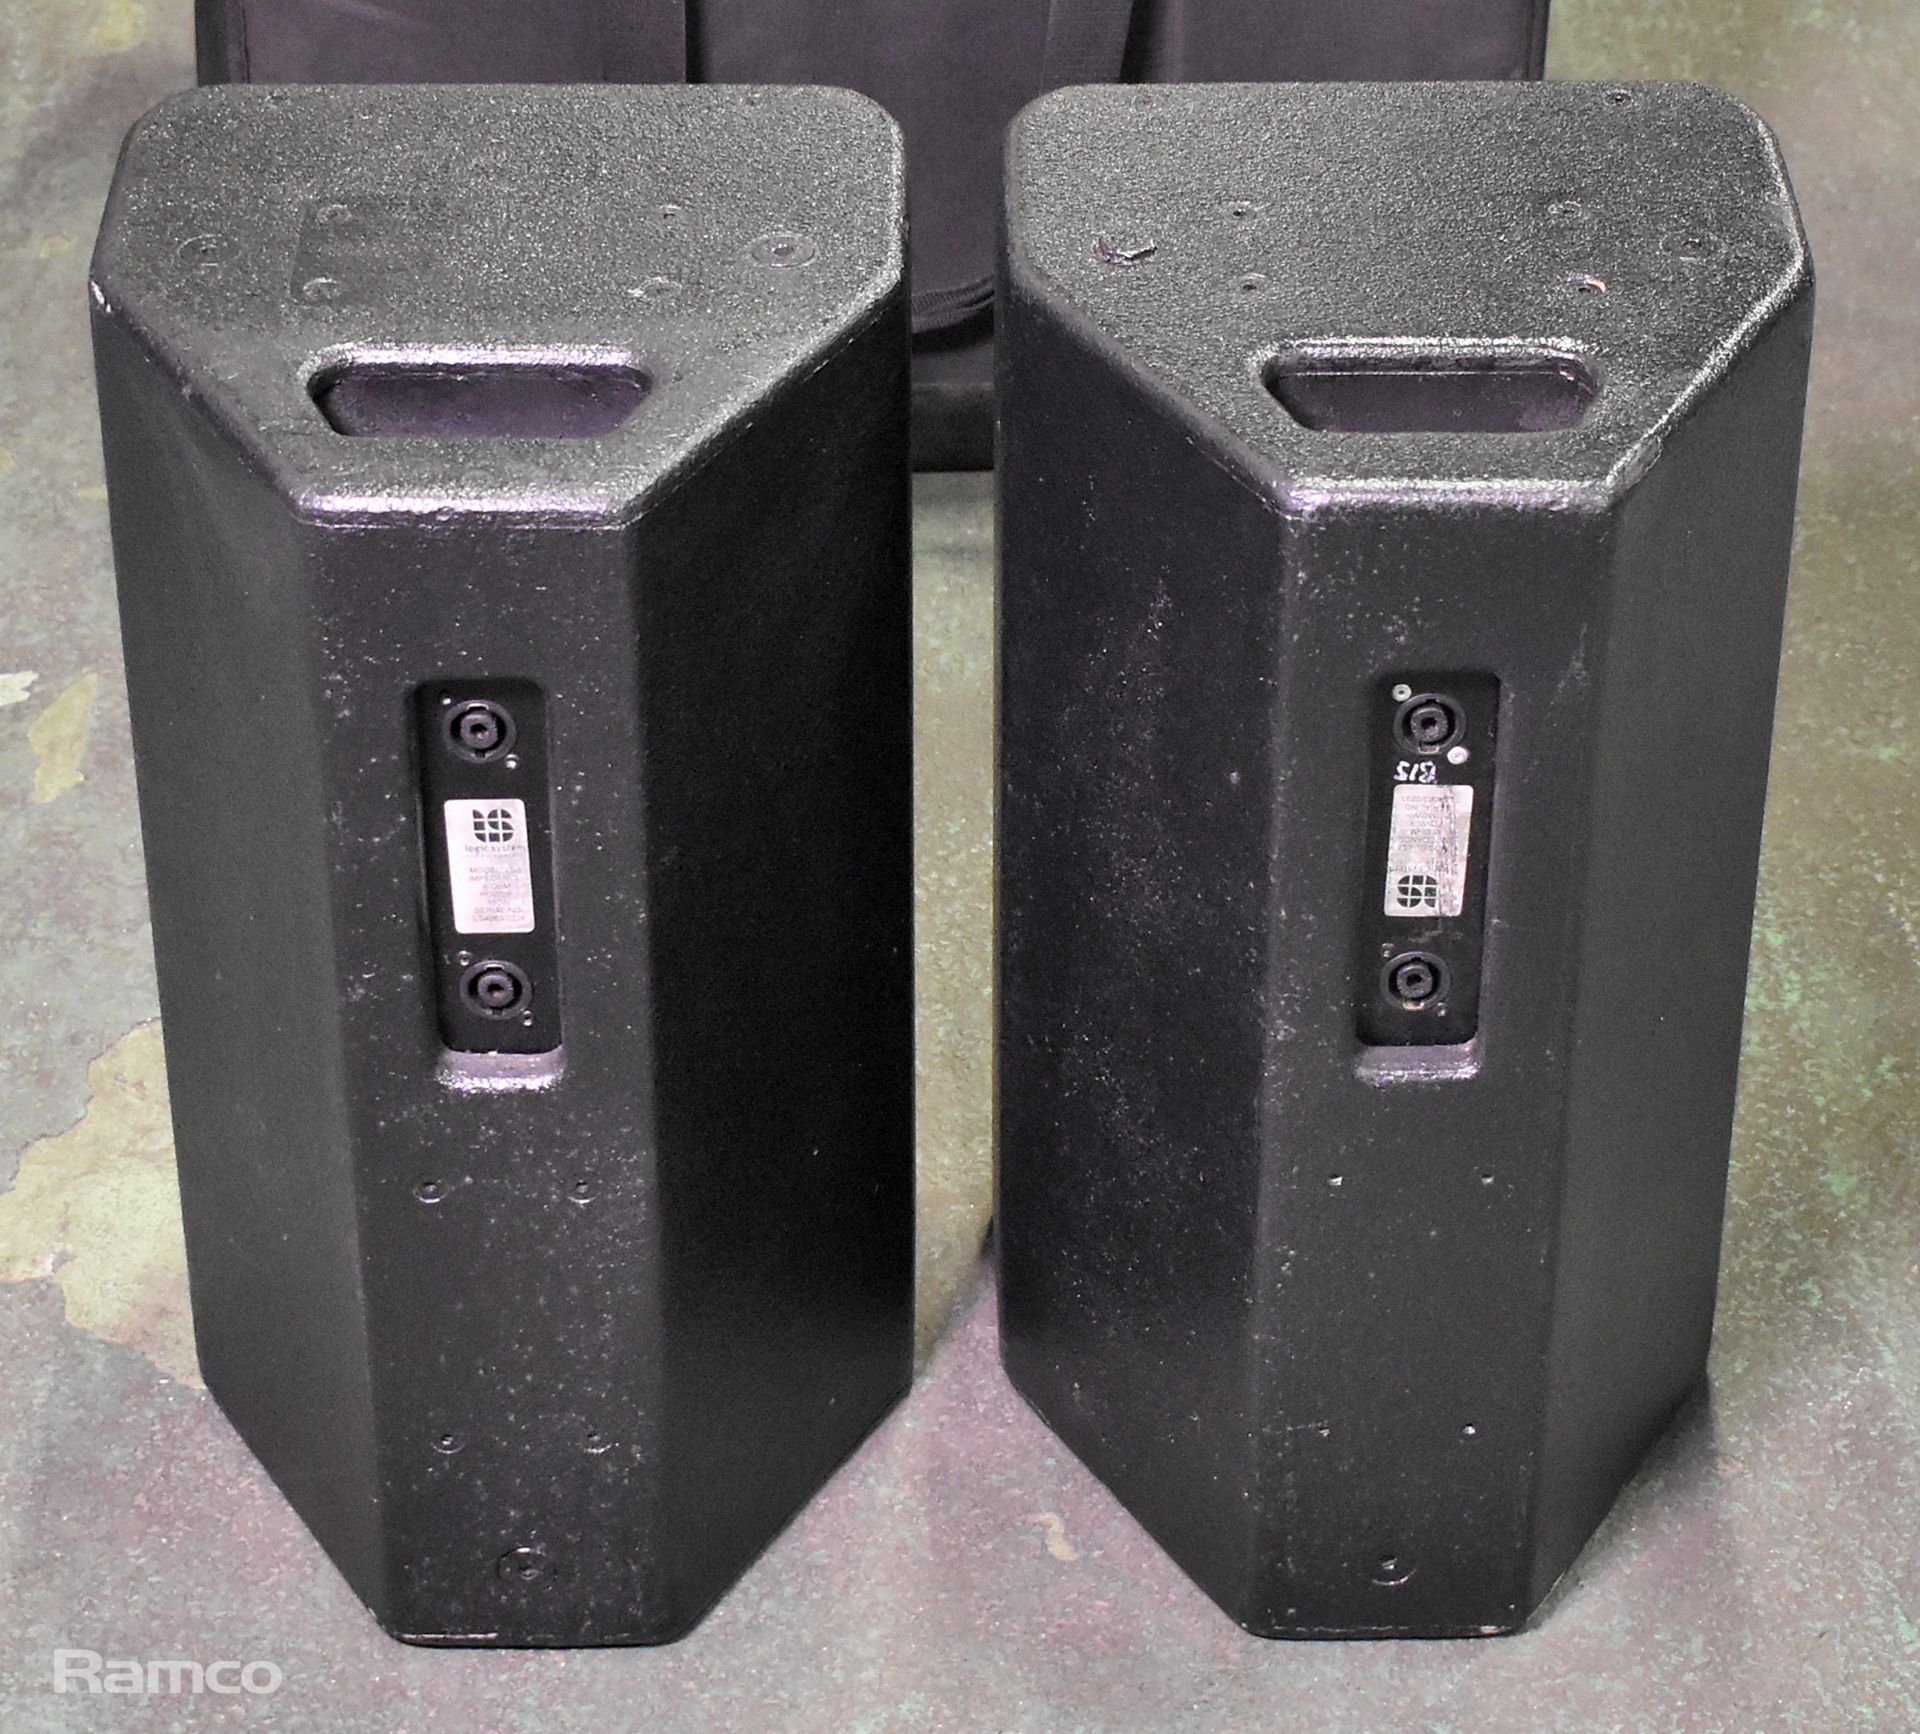 2x Logic LS8 loudspeakers - NL4 connection - recently painted with soft bag - Image 2 of 8